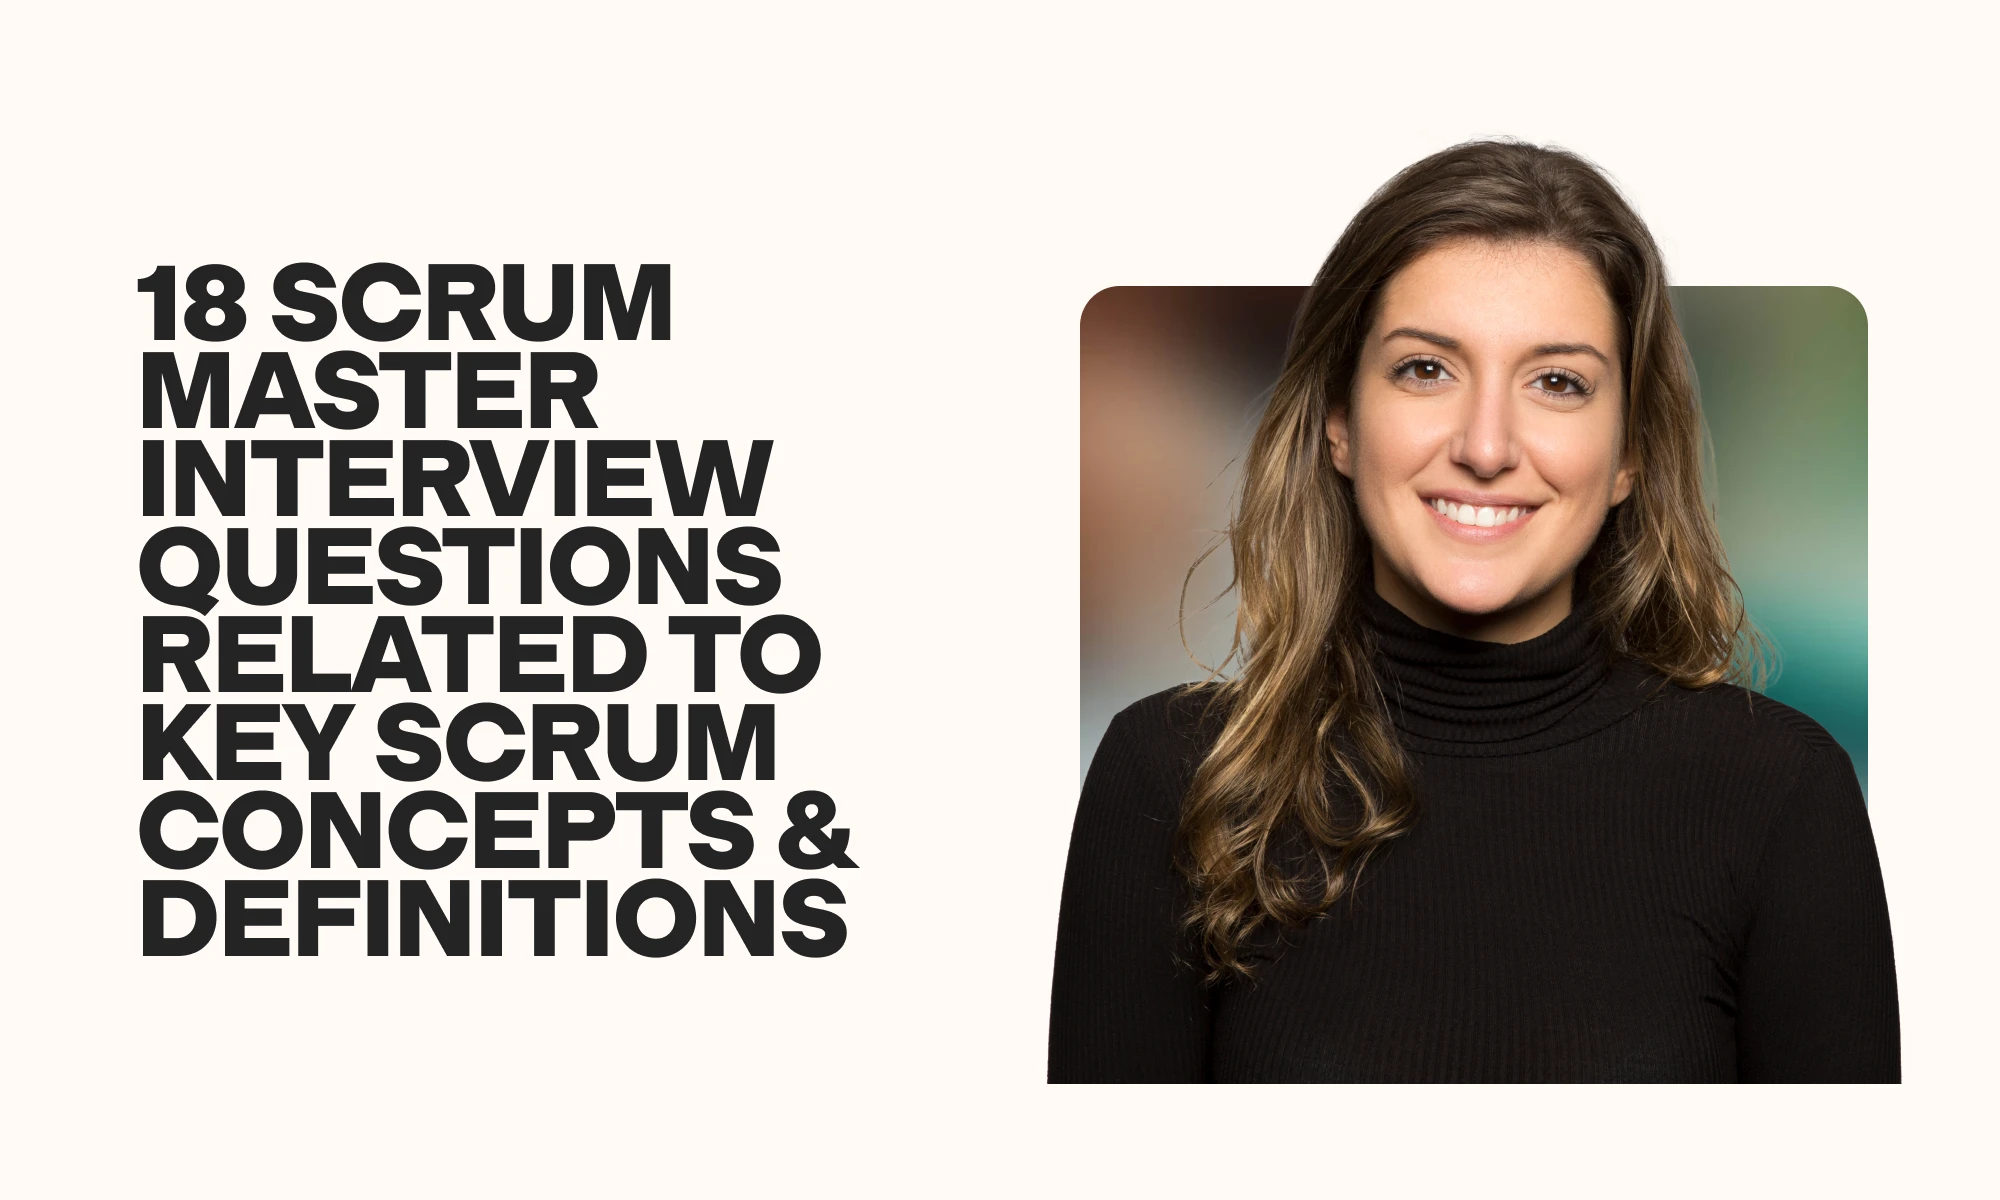 Scrum Master interview questions related to key Scrum concepts and definitions